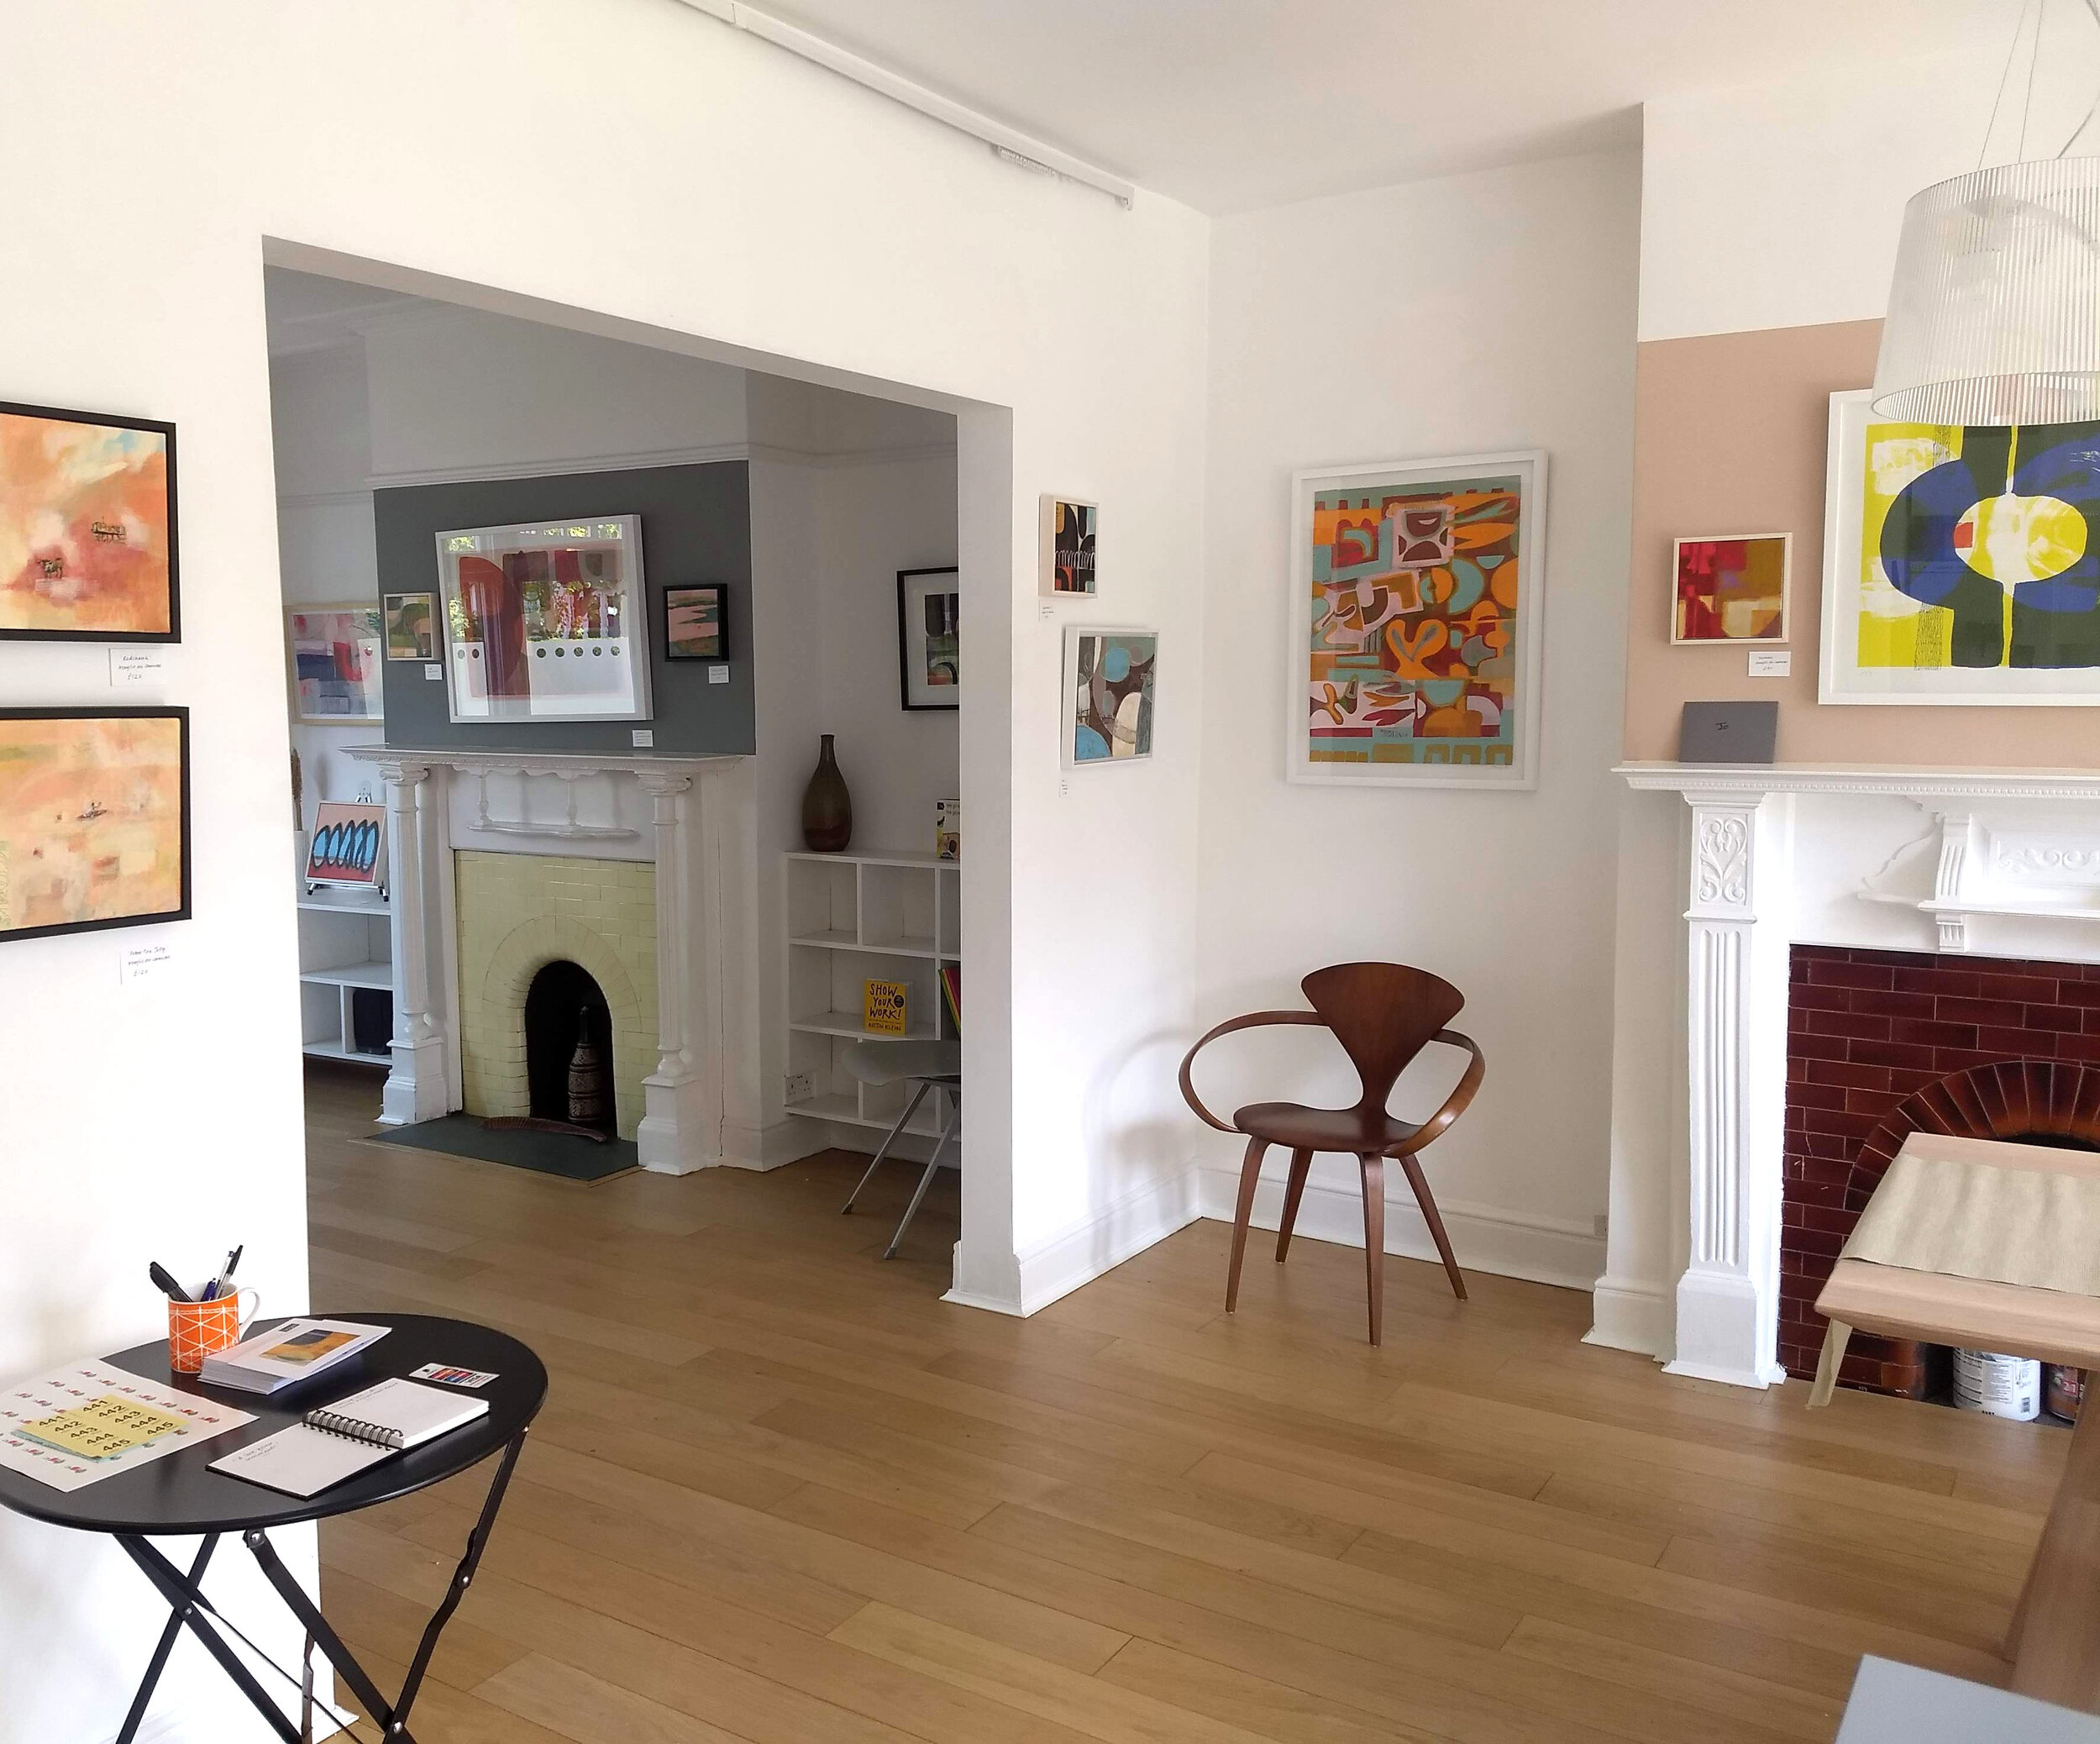 Crouch End Open Studios 2019